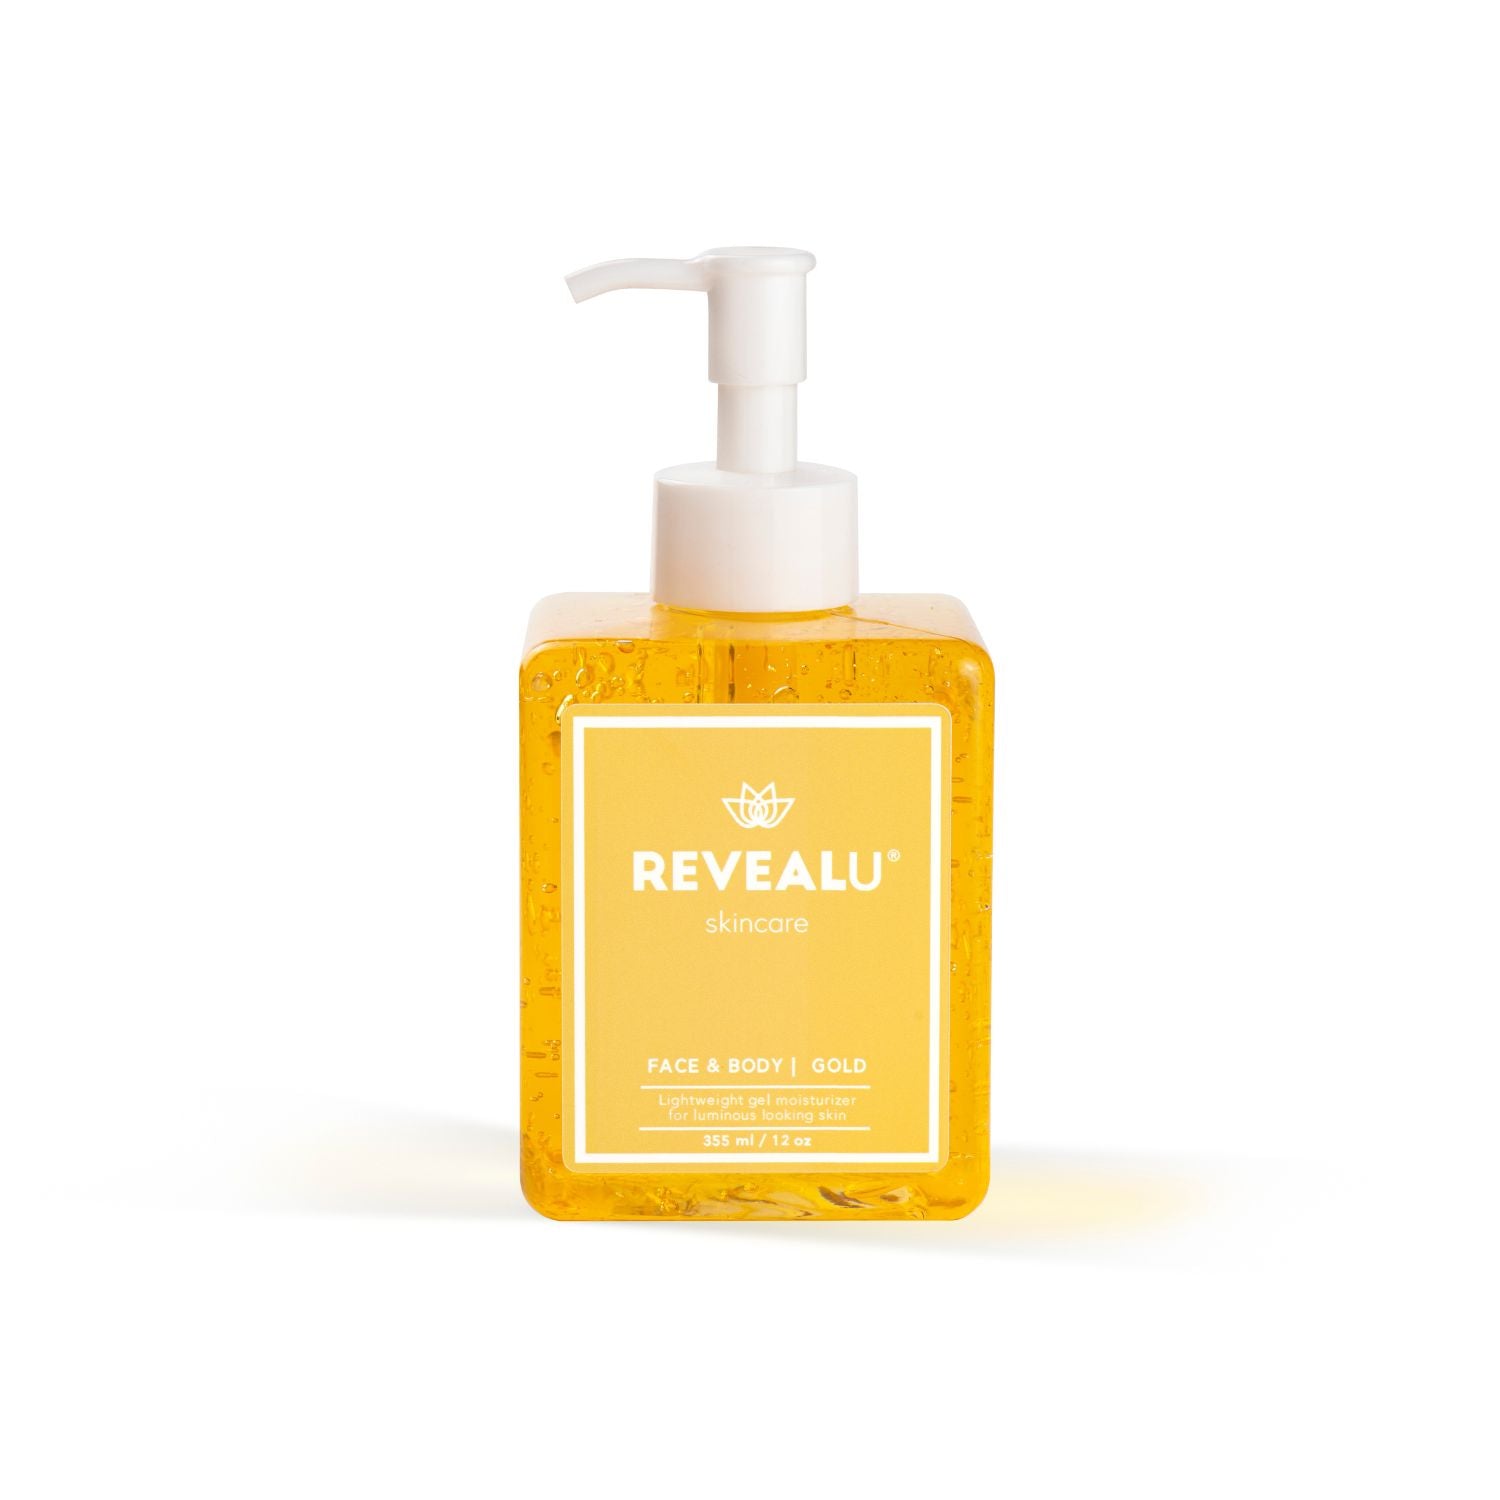 Bottle with pump of revealu face and body gold professional skincare displayed on white background